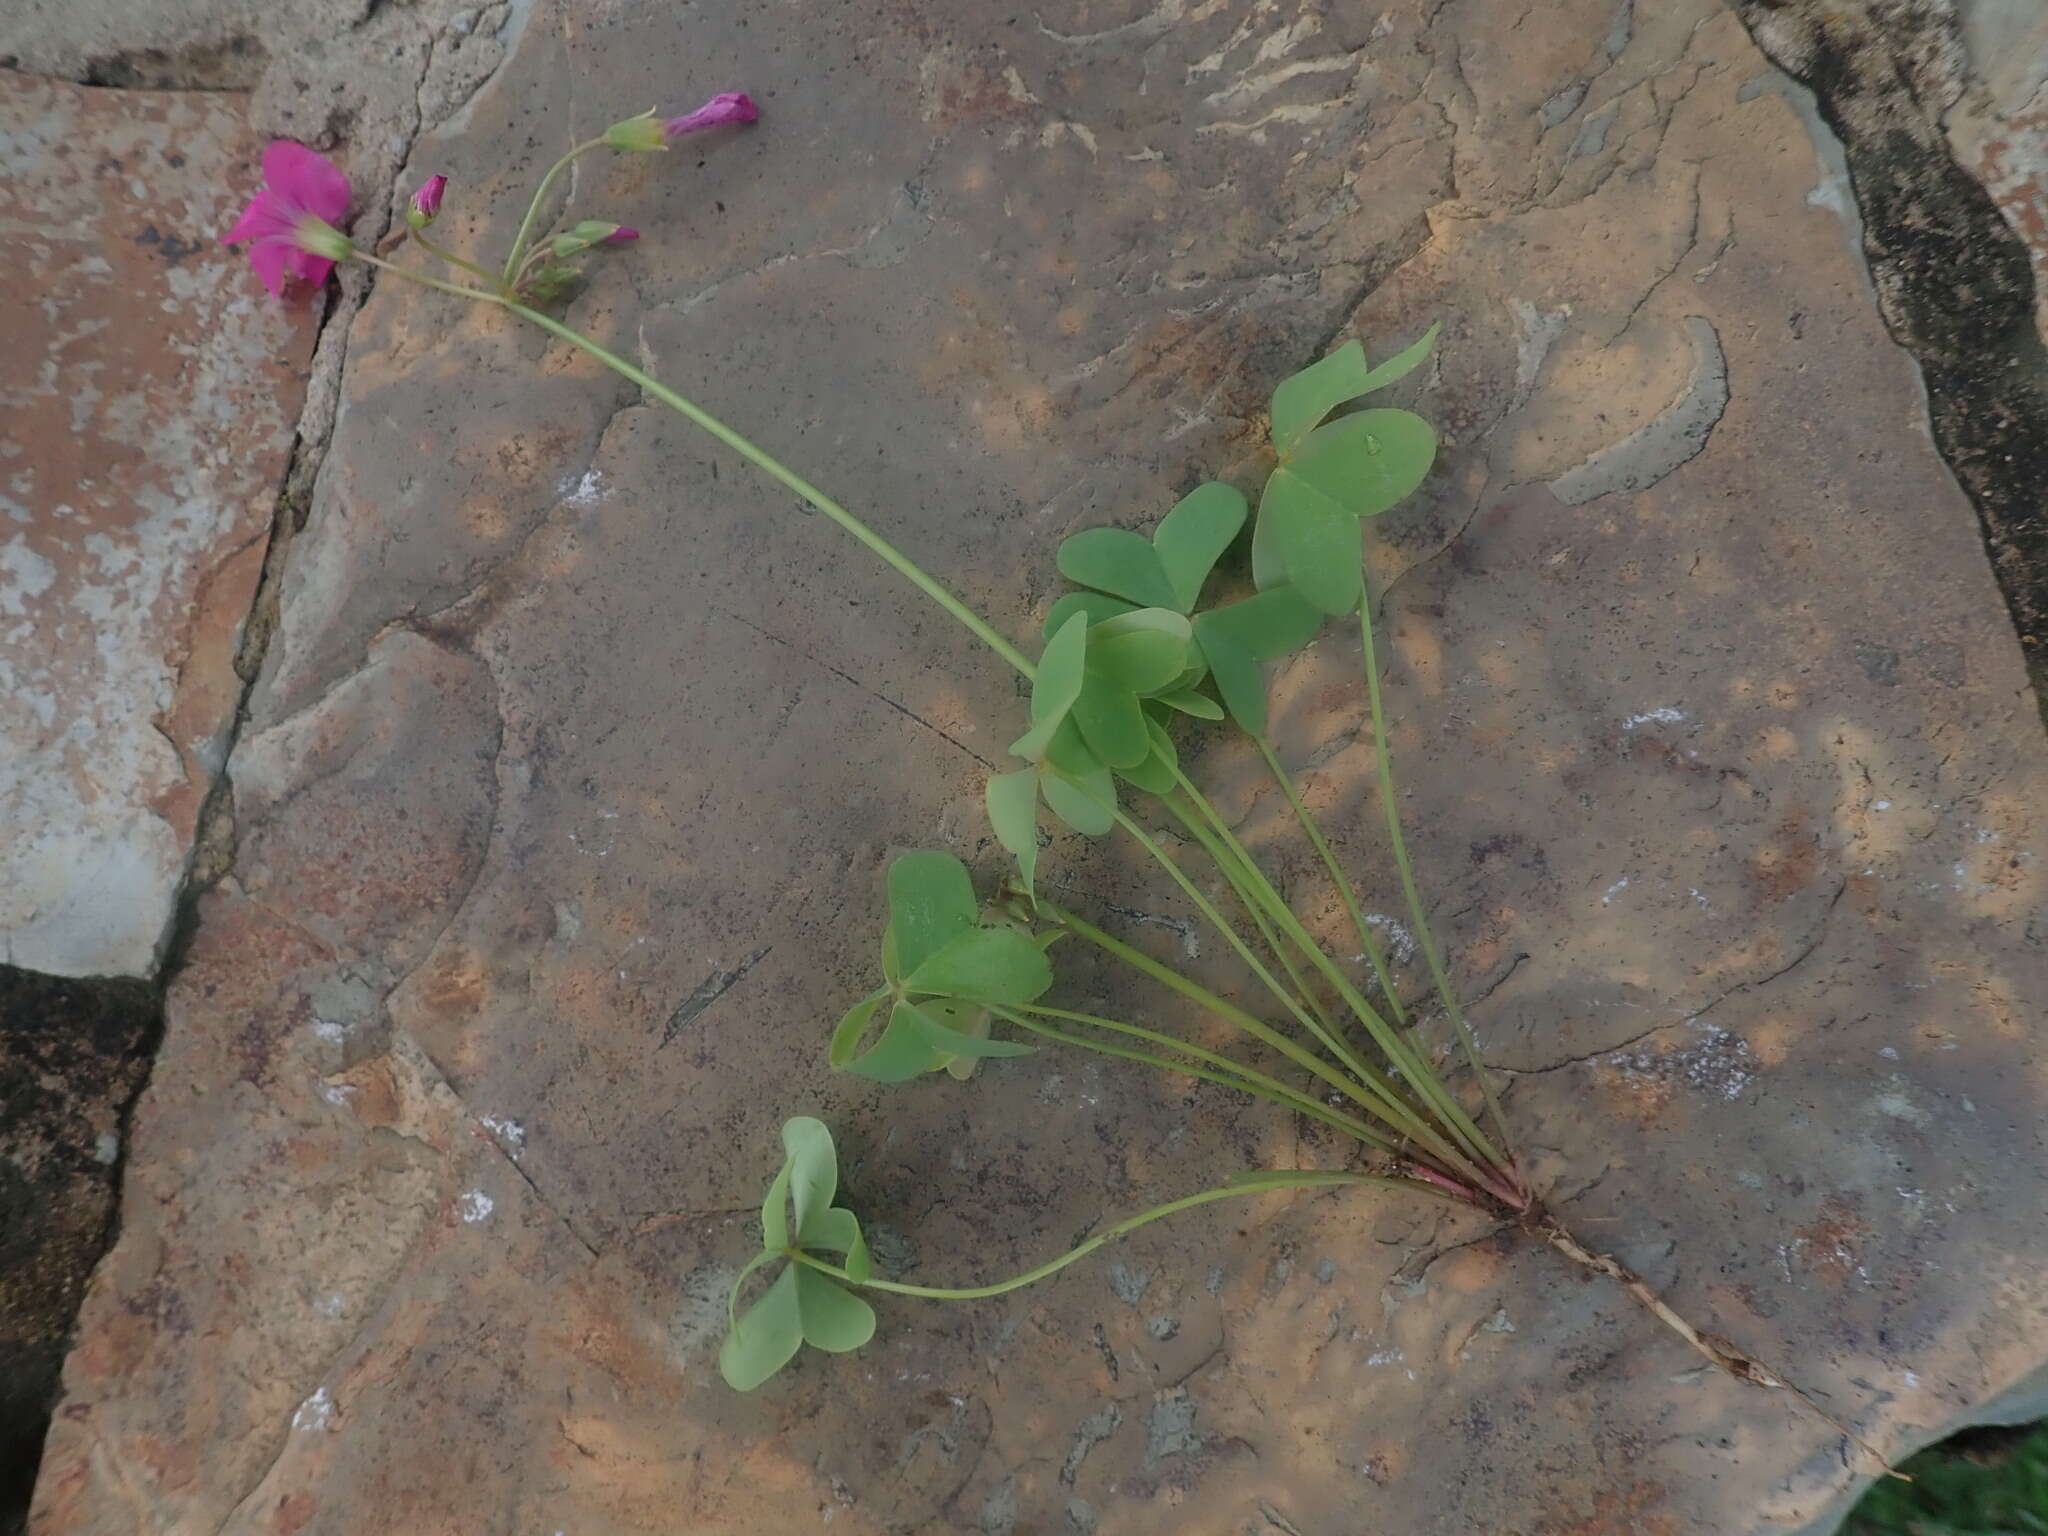 Image of Common pink sorrel